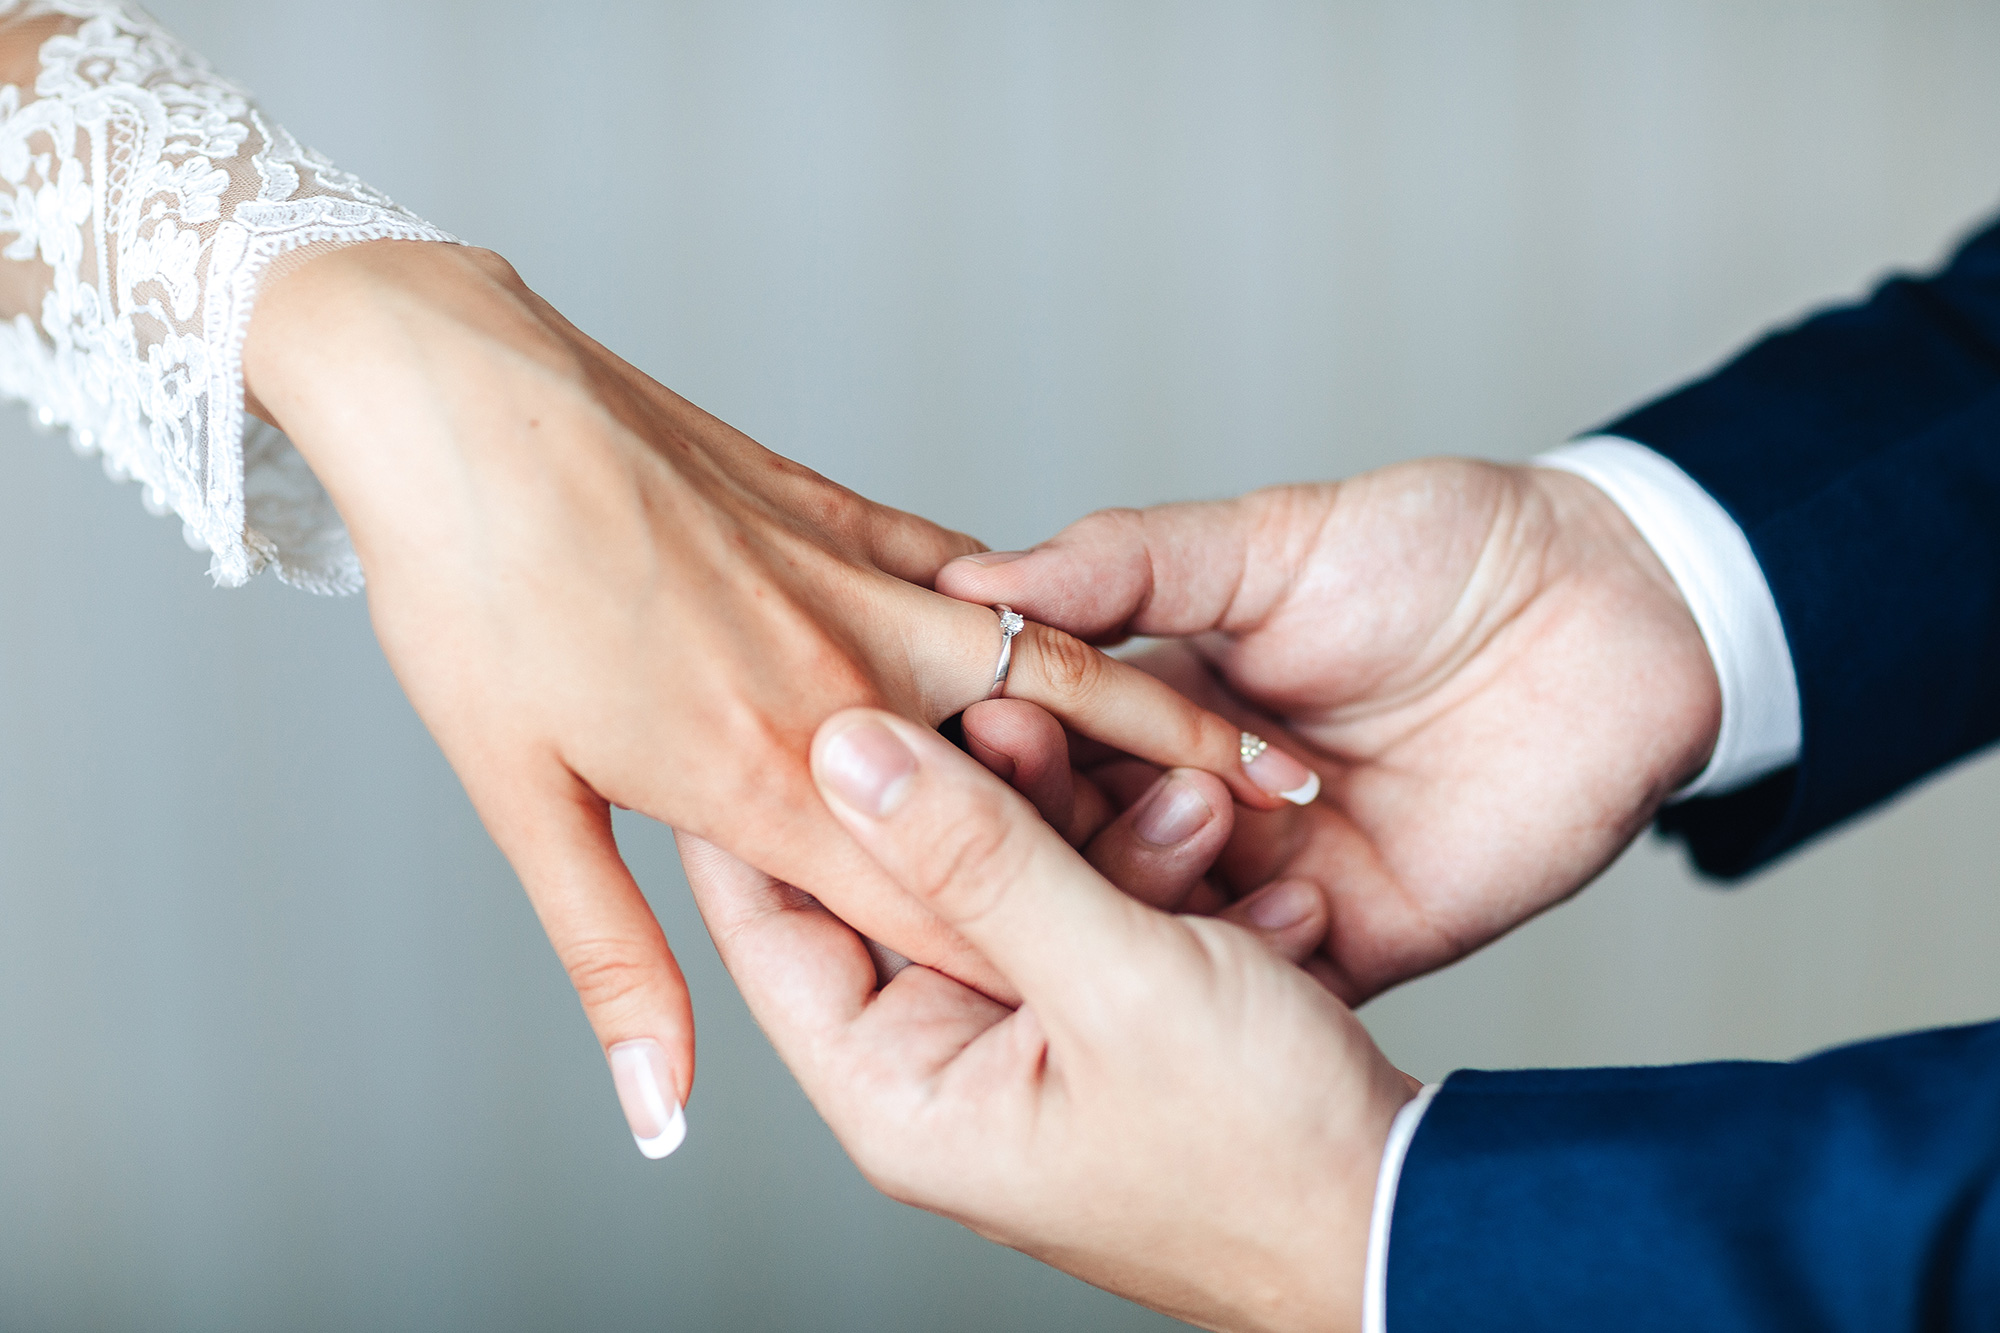 Top-down view of a pair of hands putting a wedding ring on another person’s hand